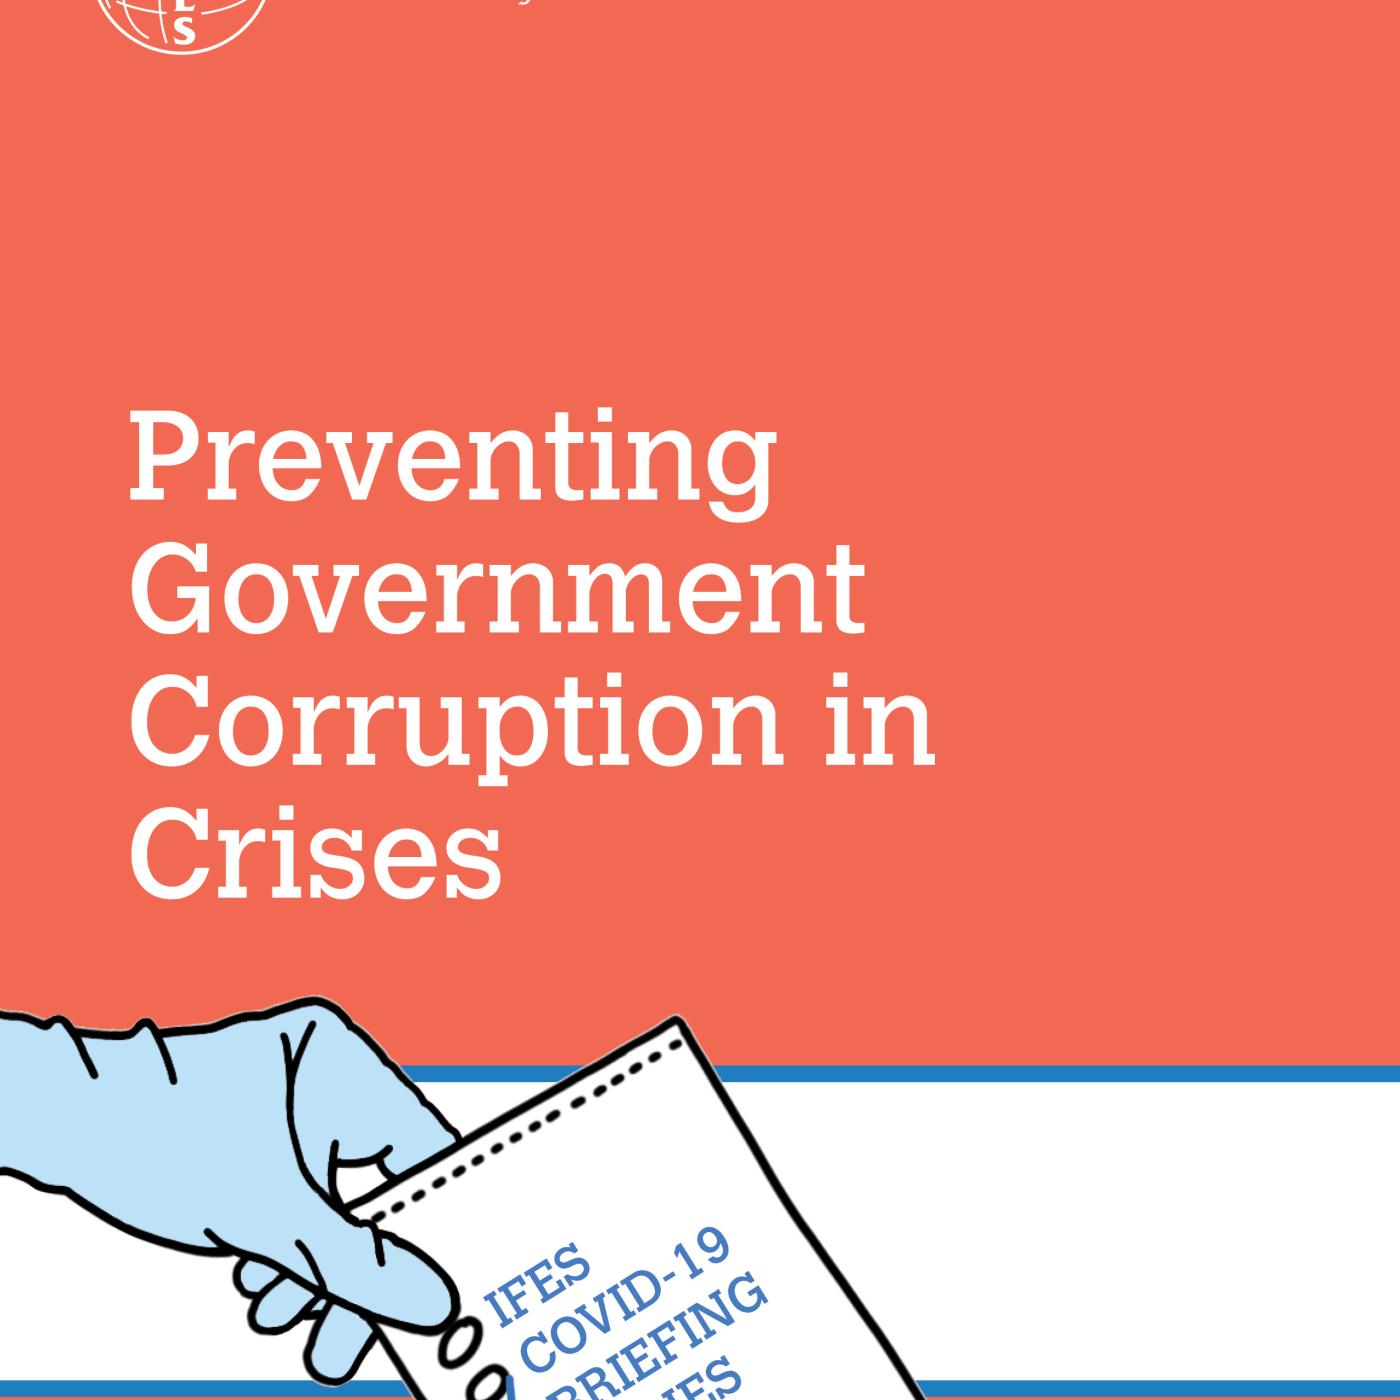 IFES COVID19 Briefing Series_Preventing Government Corruption in Crisis